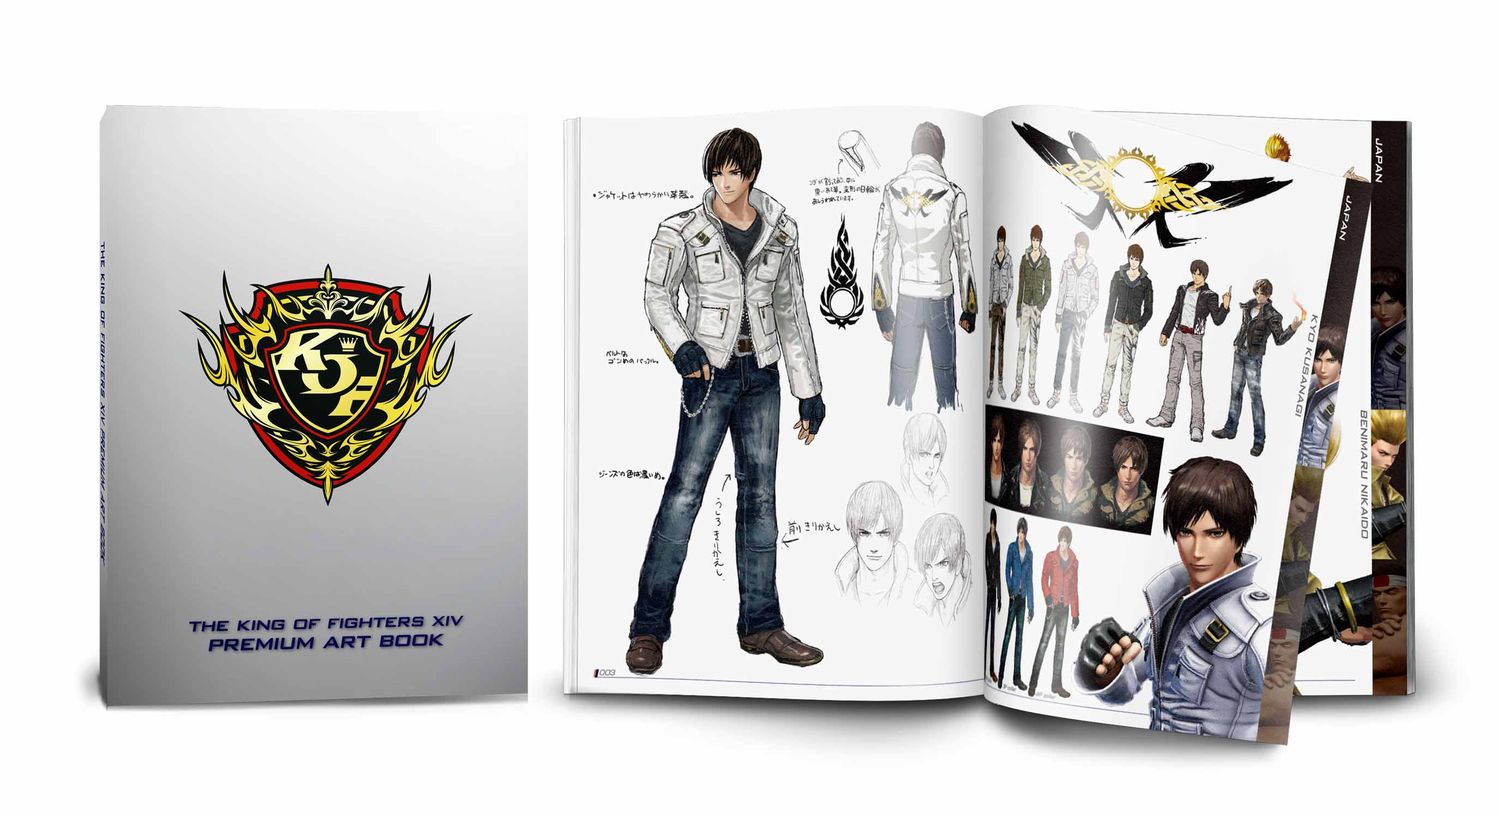 THE KING OF FIGHTERS XIV」、初回特典「PREMIUM ART BOOK」の詳細を